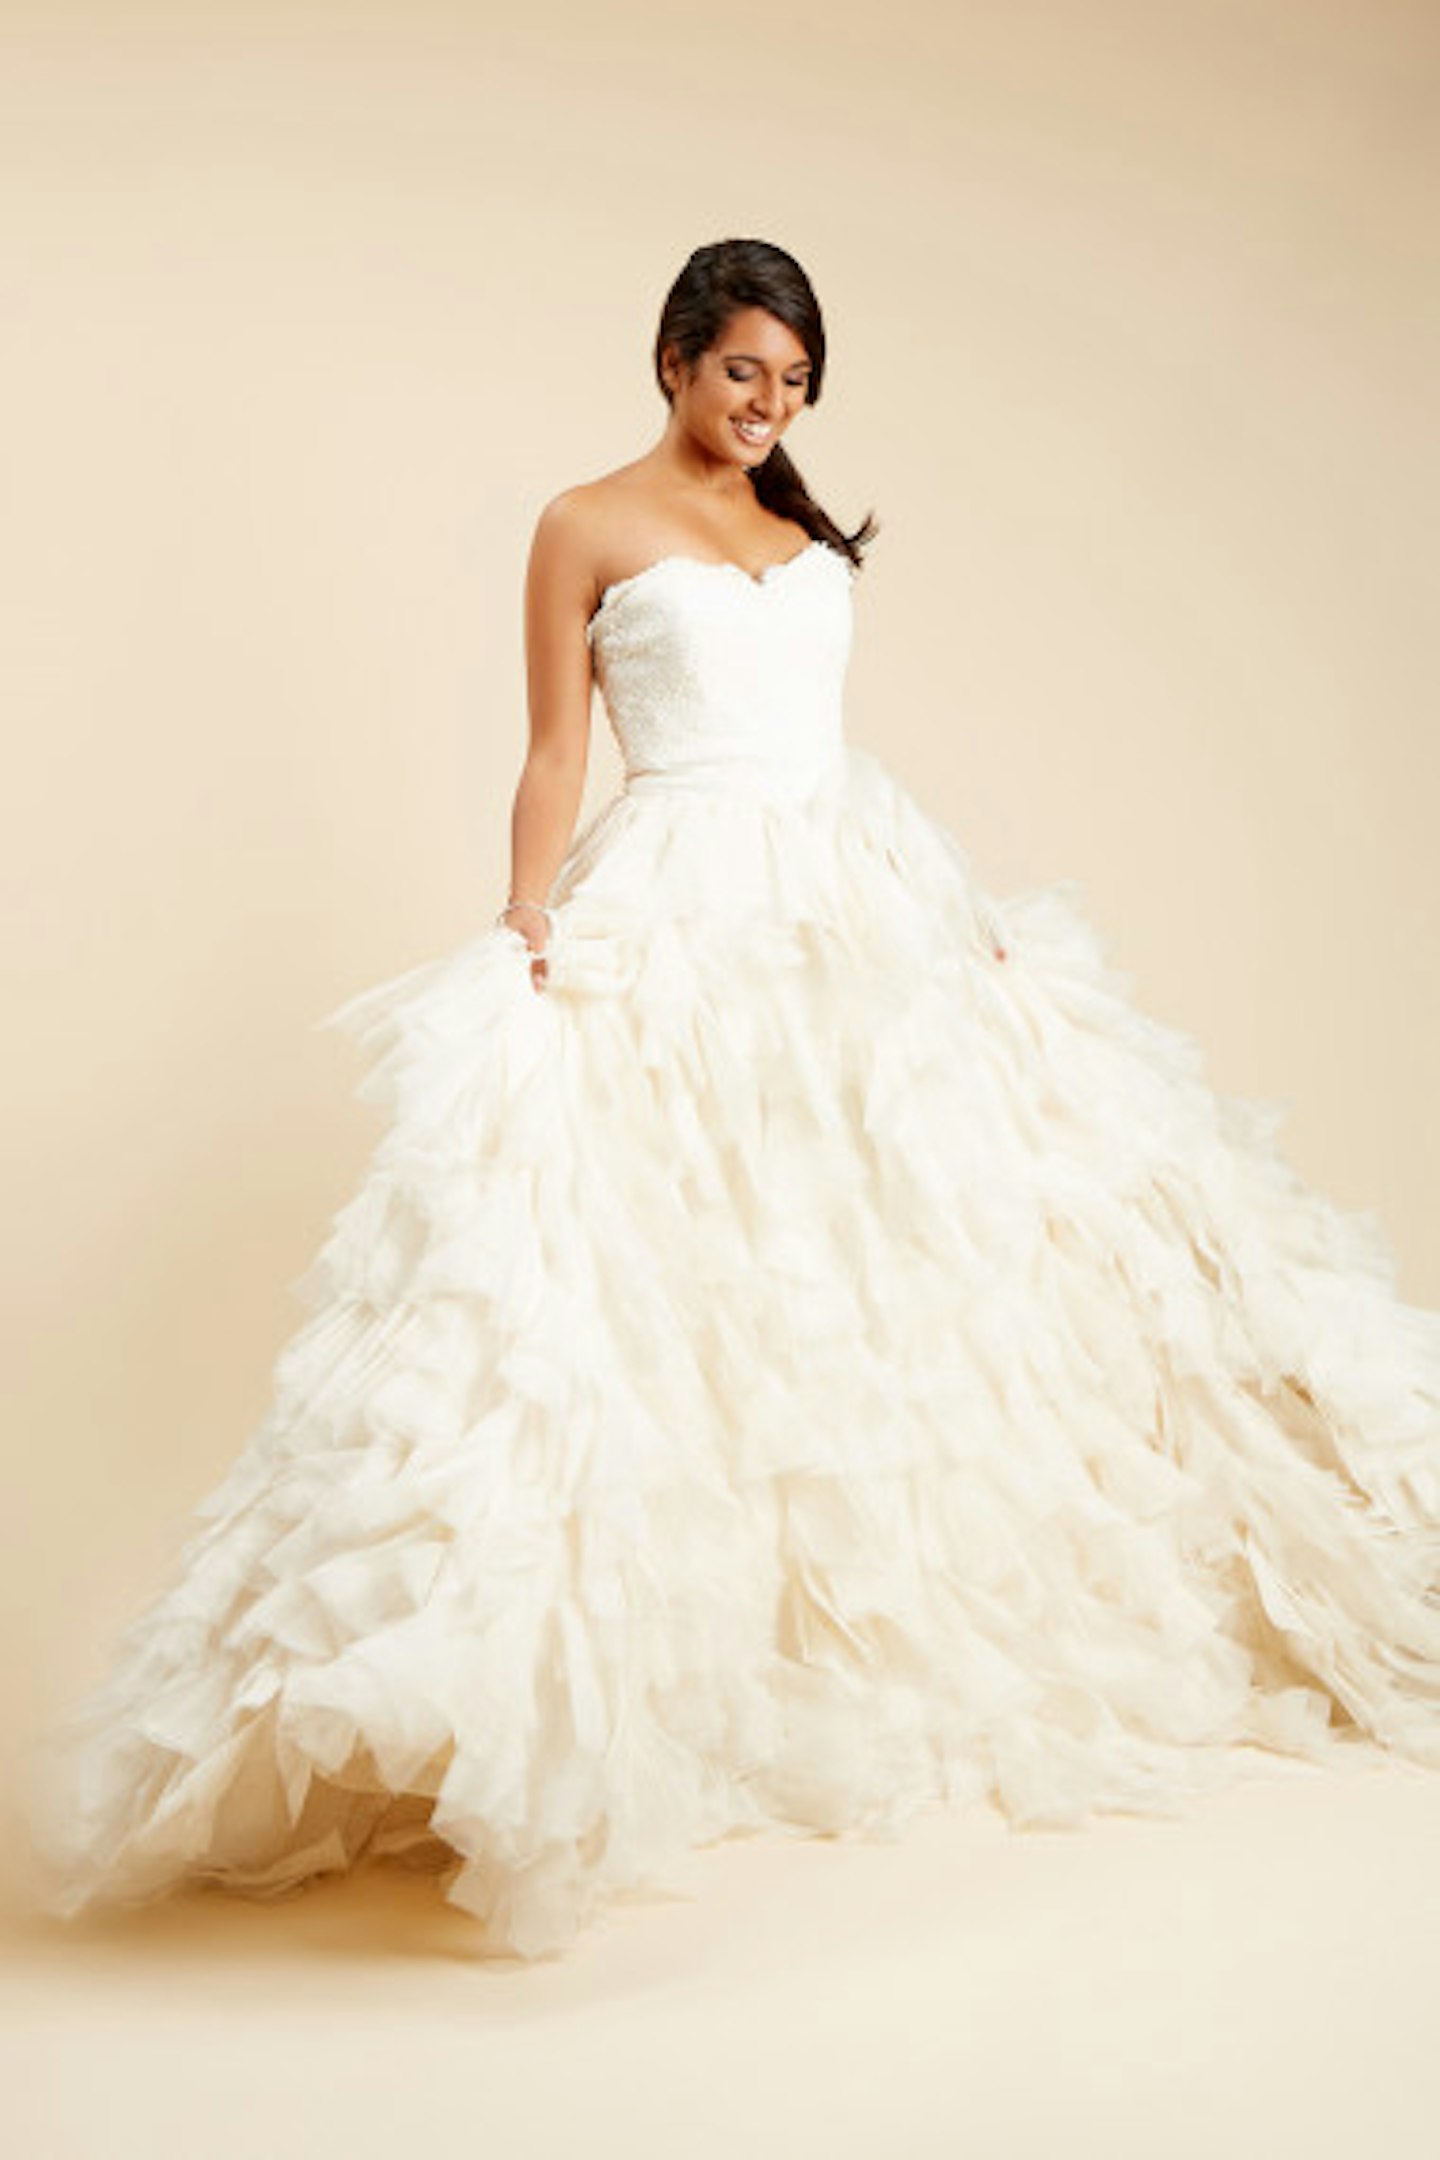 Sareh Nouri, Couture Tulle Dress with Ruffle Skirt, WAS £7,700, NOW £3,500